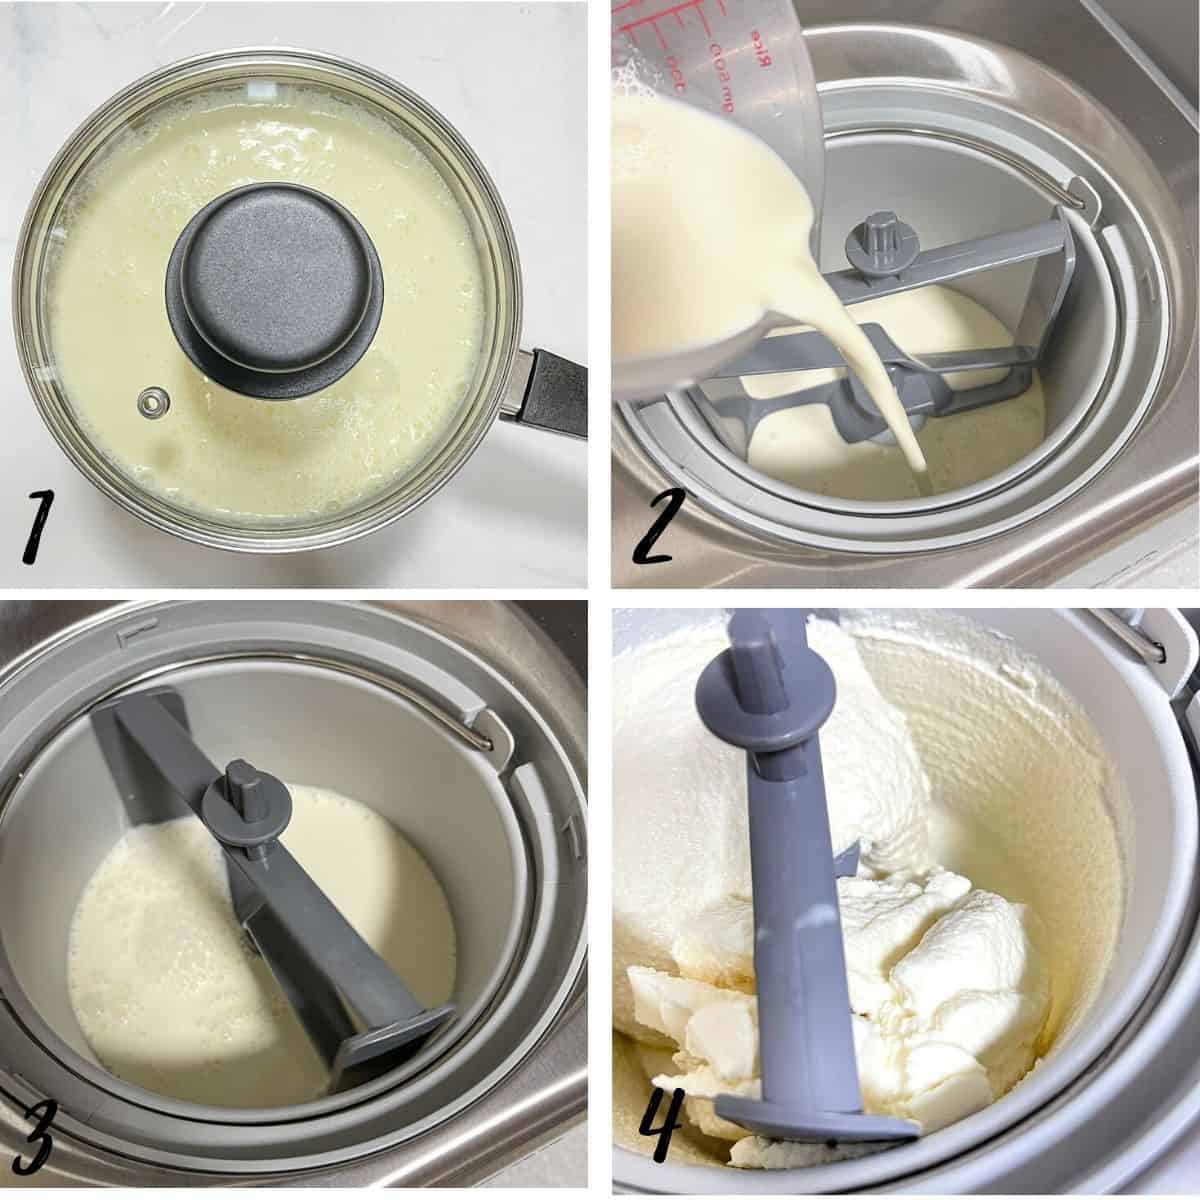 A poster of 4 images showing how to churn ice cream in an ice cream maker